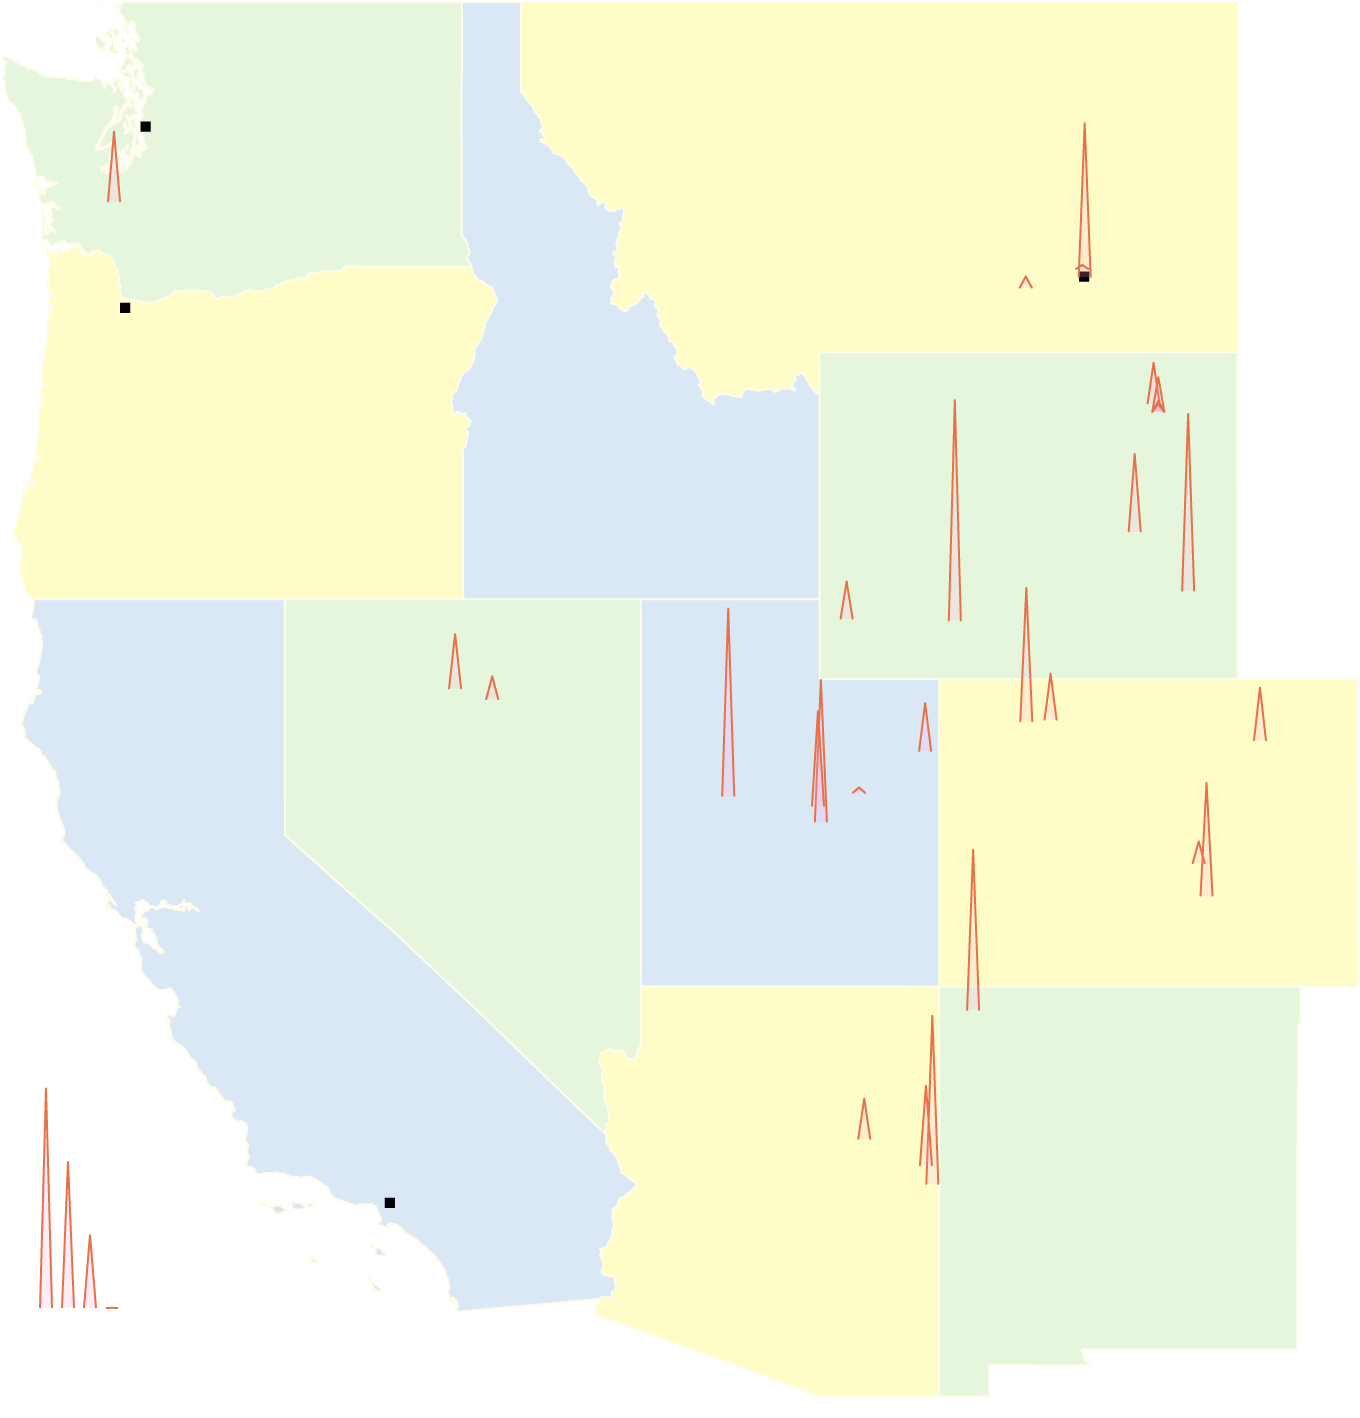 A map of the western United States represents coal power plants as spikes sized by the amount of power they generate. The most larges spikes are in Utah, Wyoming and Montana, including the Colstrip power plant.